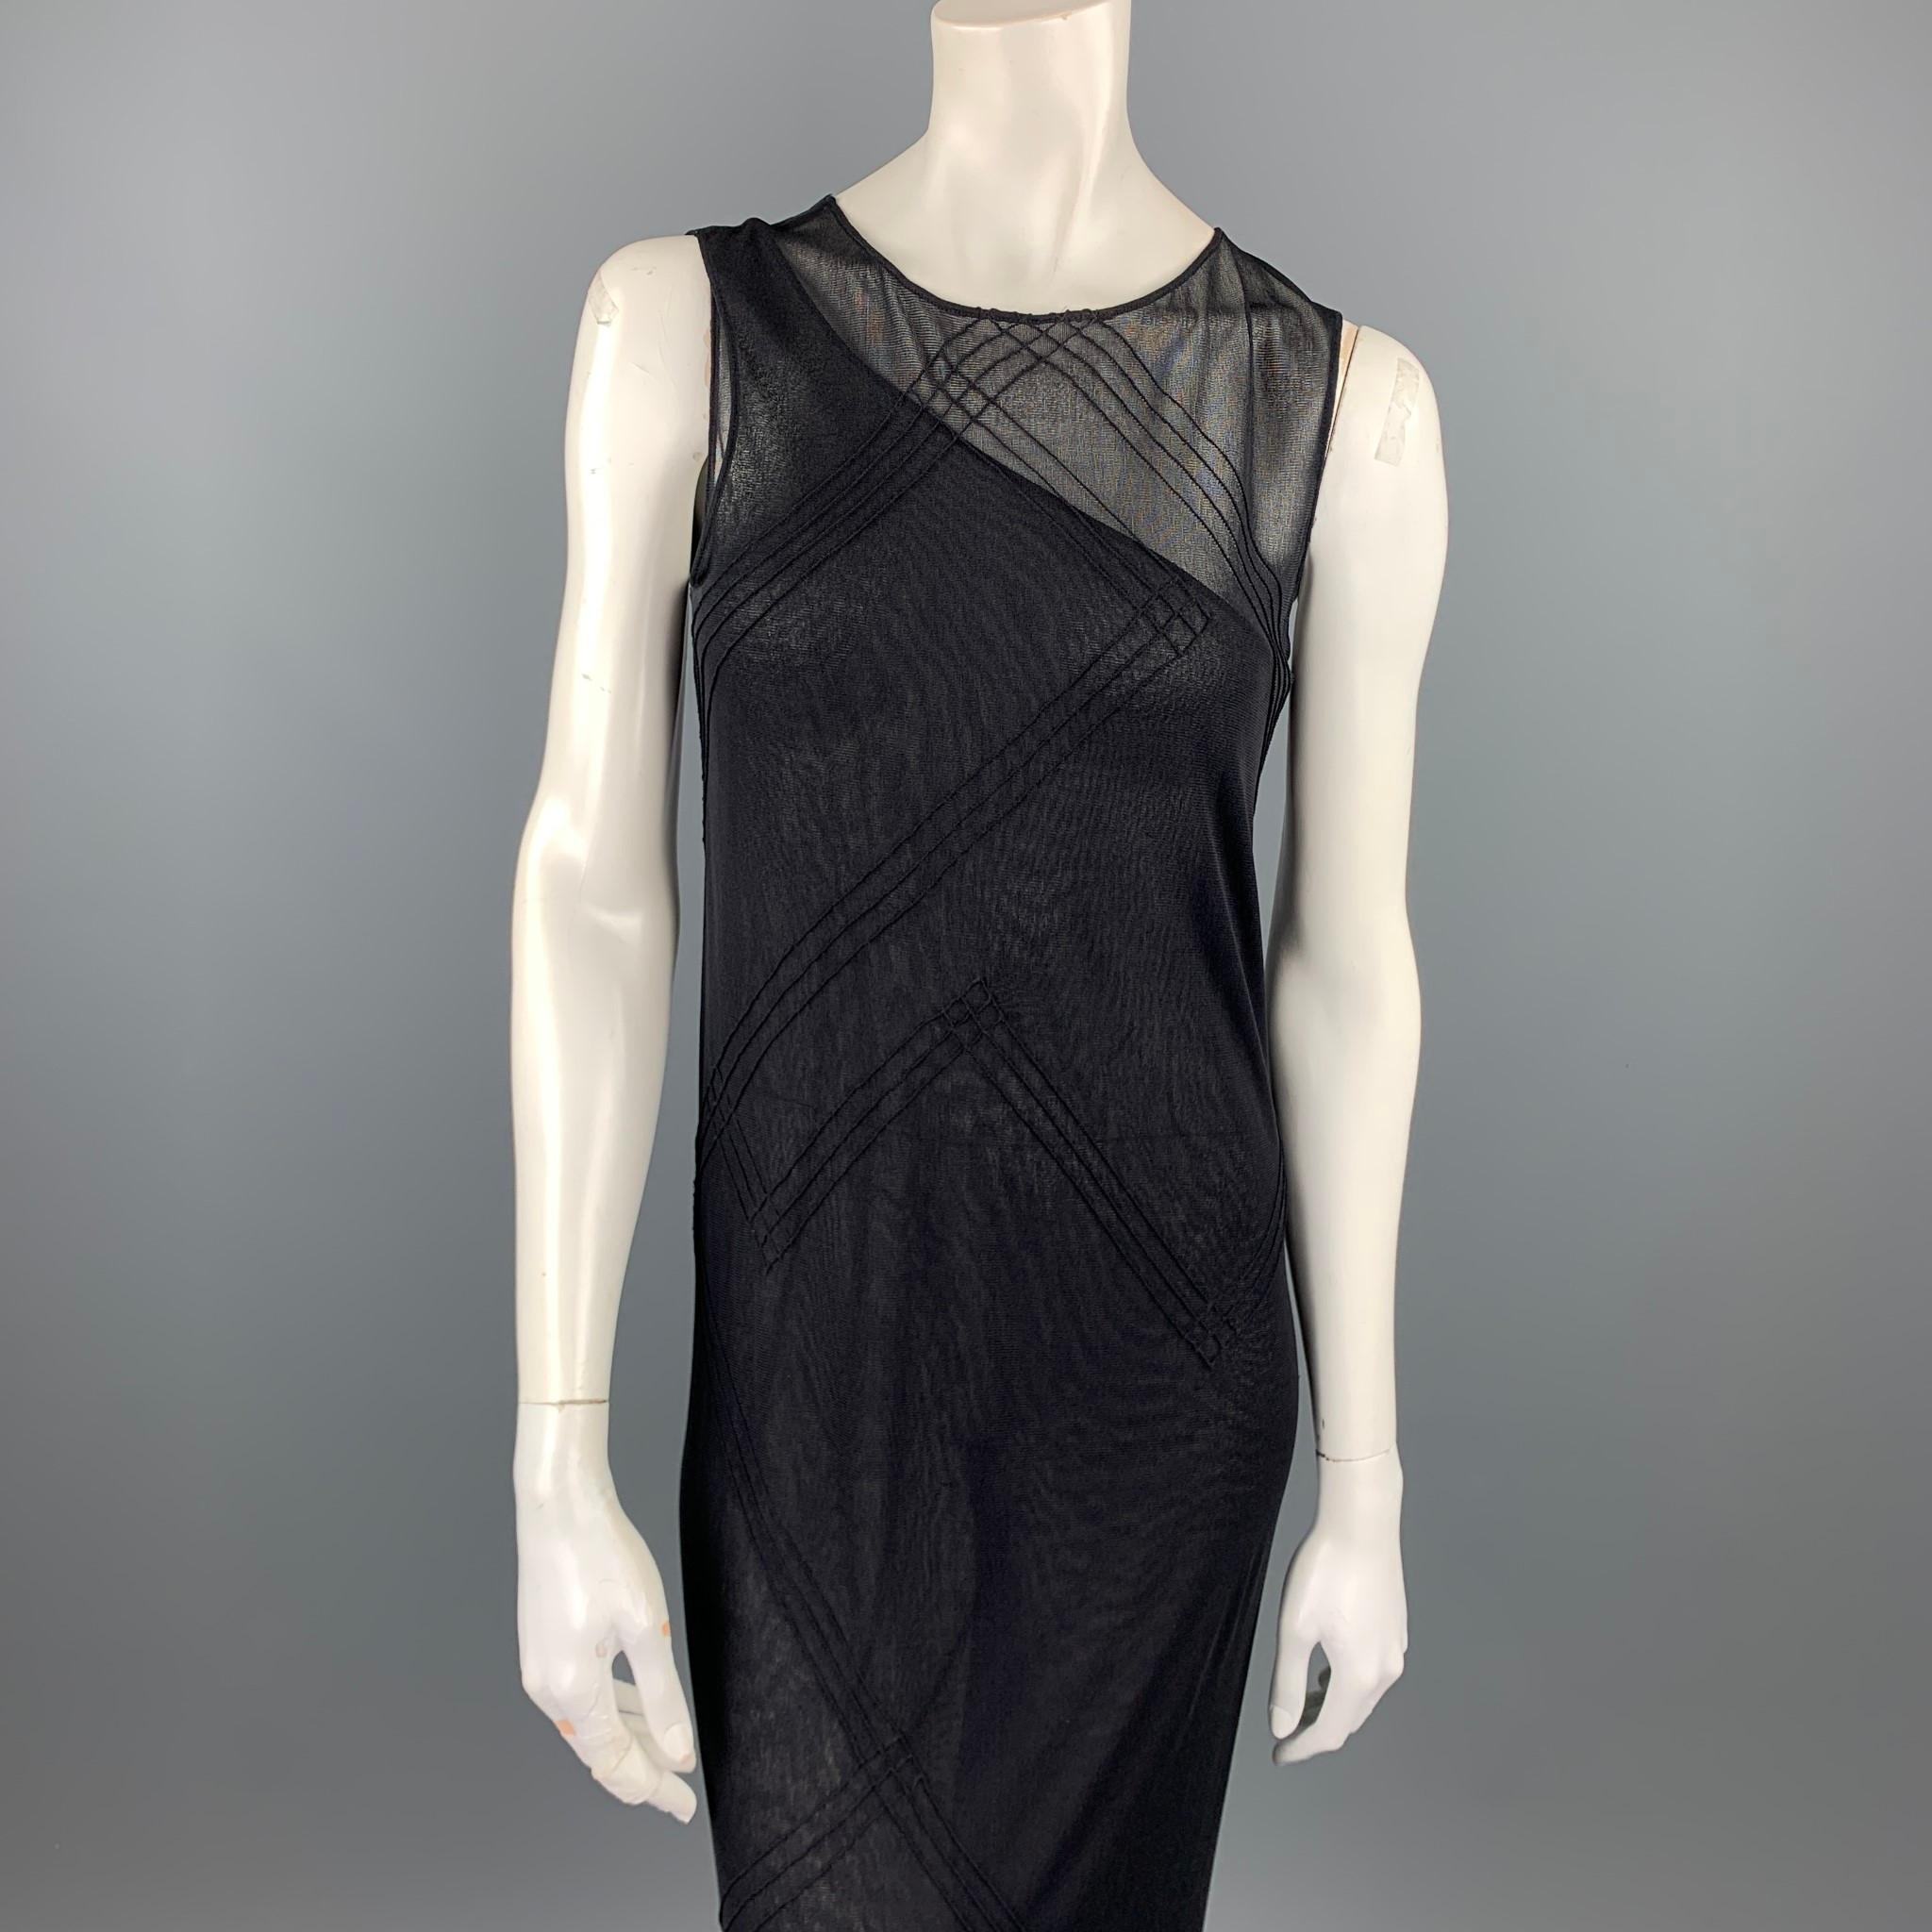 DONNA KARAN dress comes in a black mesh polyester / rayon with a one shoulder liner featuring a shift style, slip on, and top stitching. Made in USA.

Very Good Pre-Owned Condition.
Marked: L

Measurements:

Shoulder: 15 in. 
Bust: 34 in. 
Hip: 34